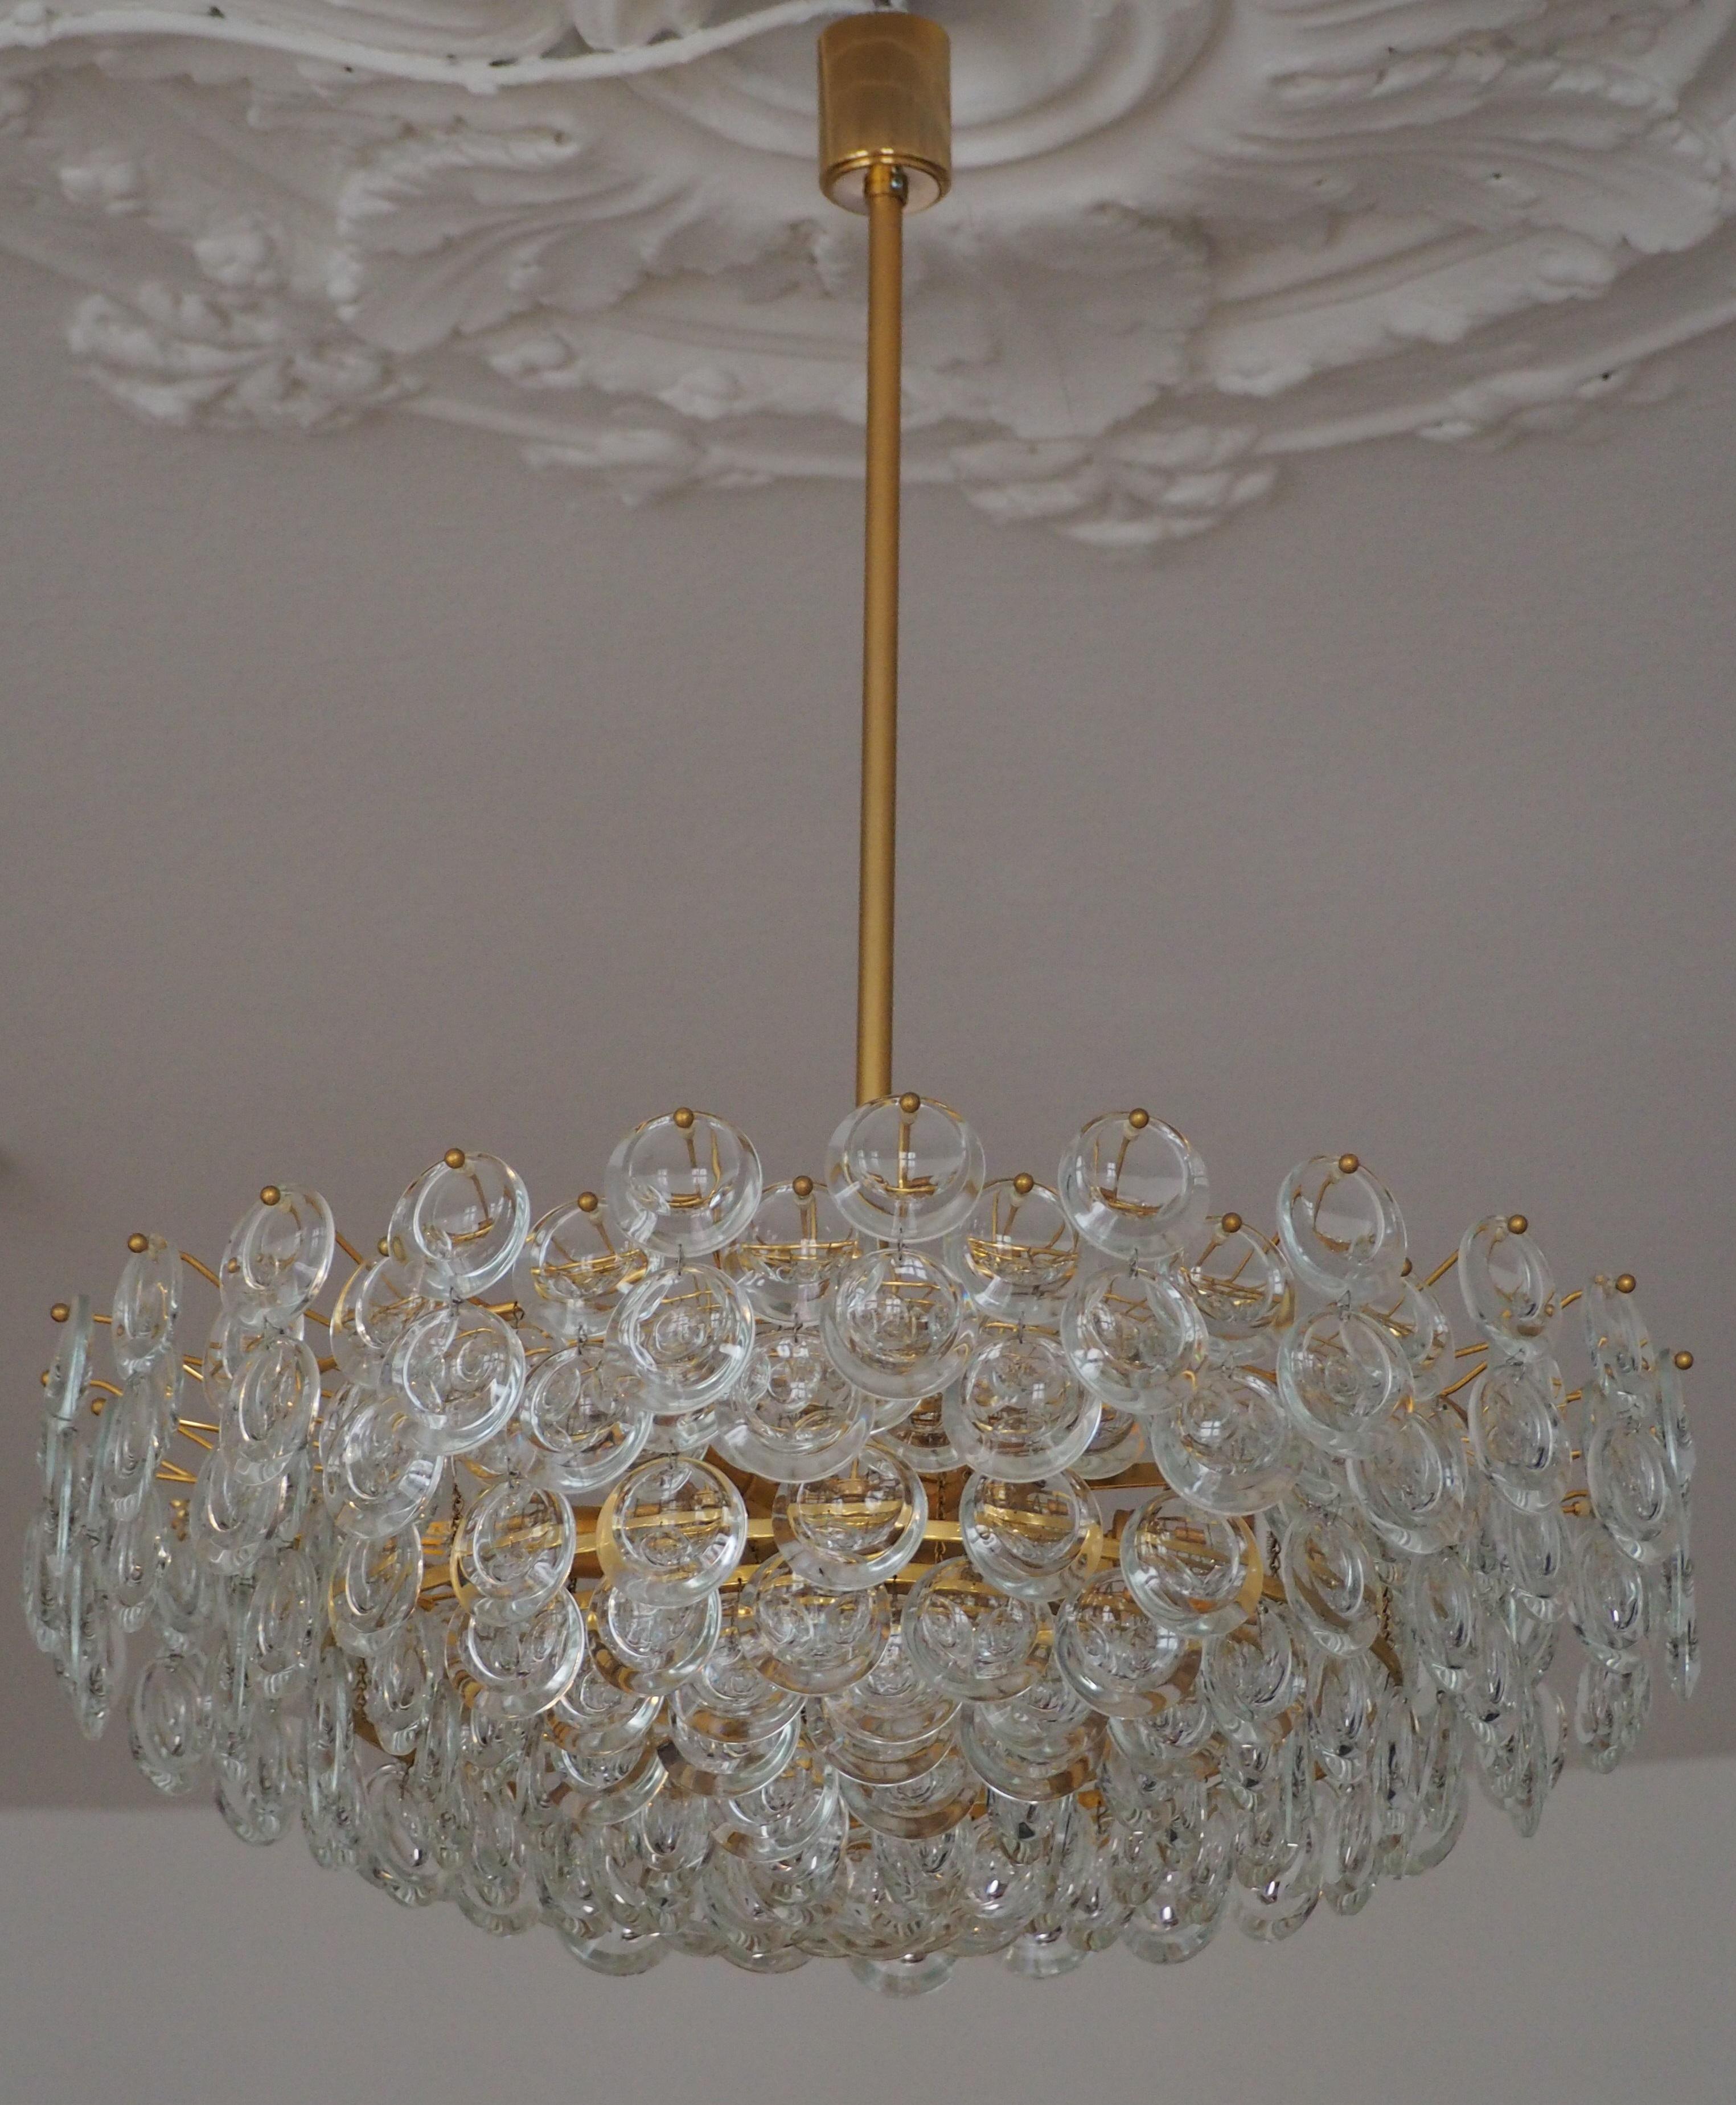 Very Large Gold-Plated and Cut Glass Chandelier by Palwa, circa 1960s For Sale 6